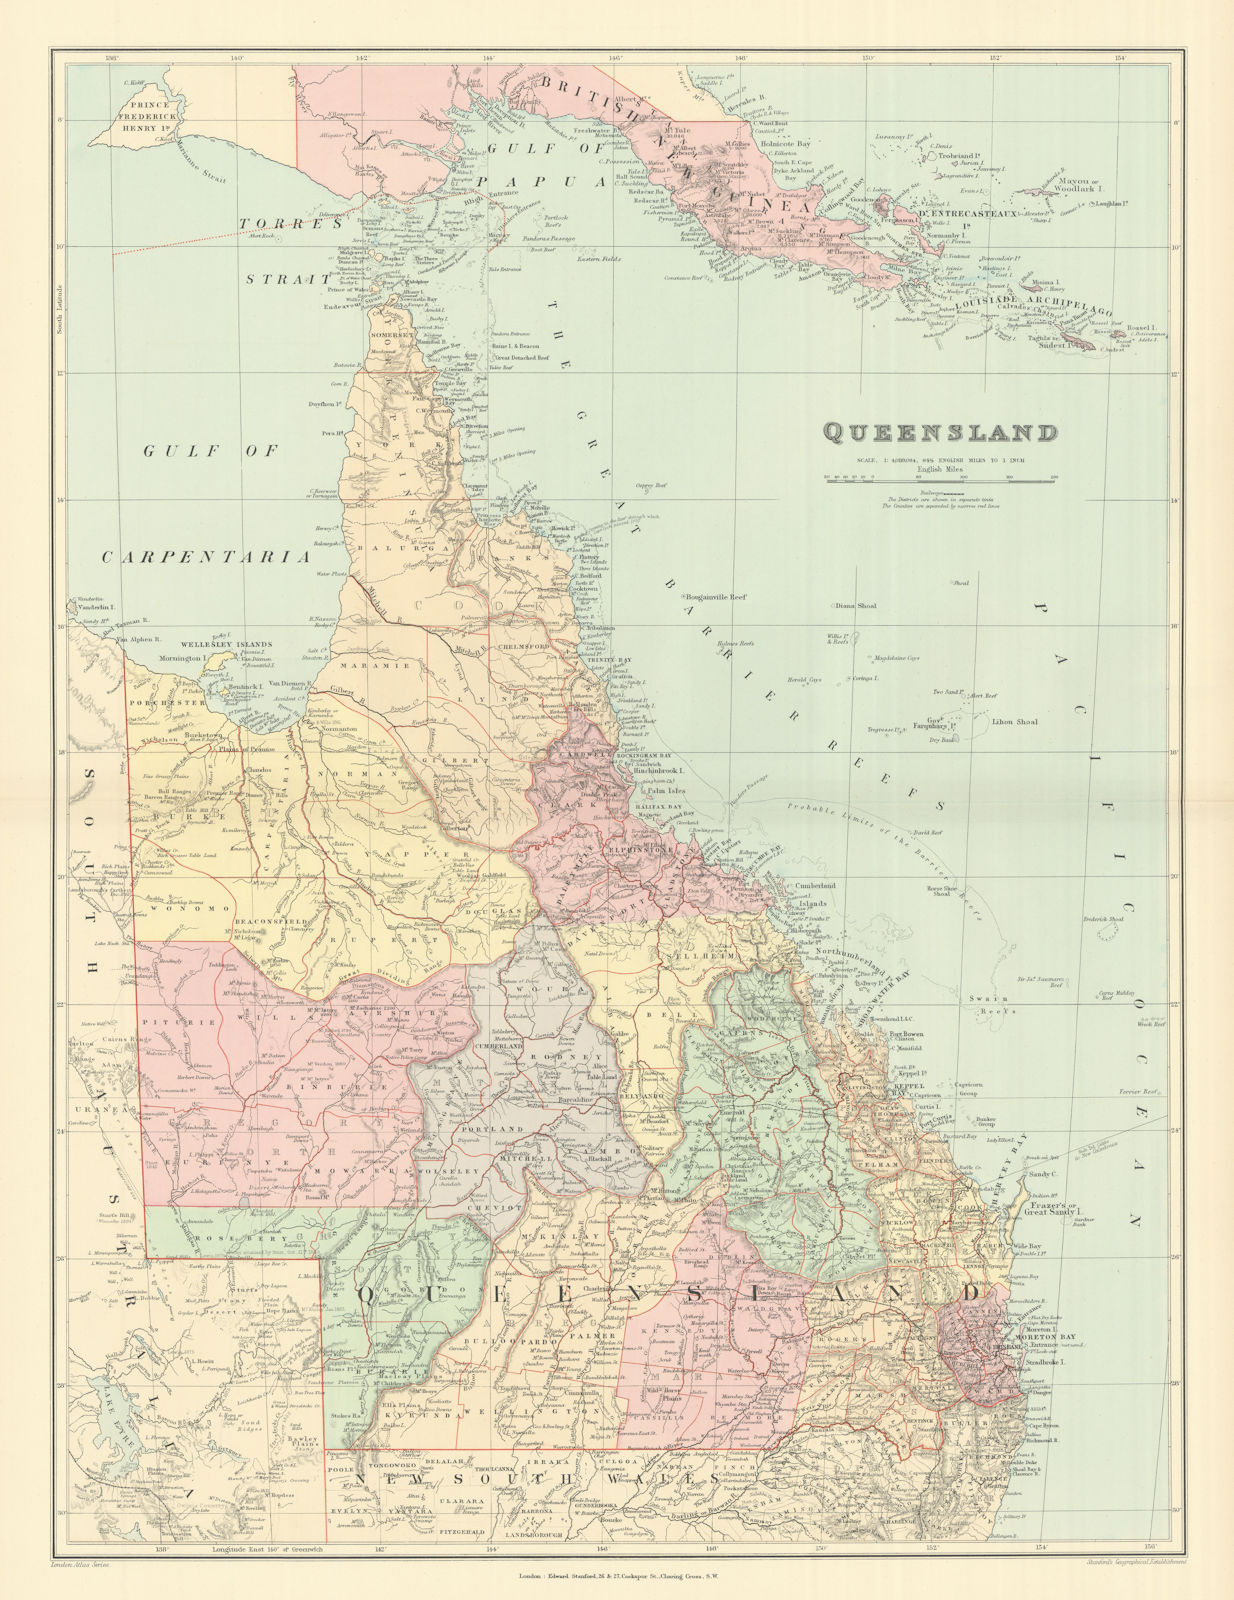 Associate Product Queensland. British New Guinea. Great Barrier Reef. 68x52cm. STANFORD 1894 map